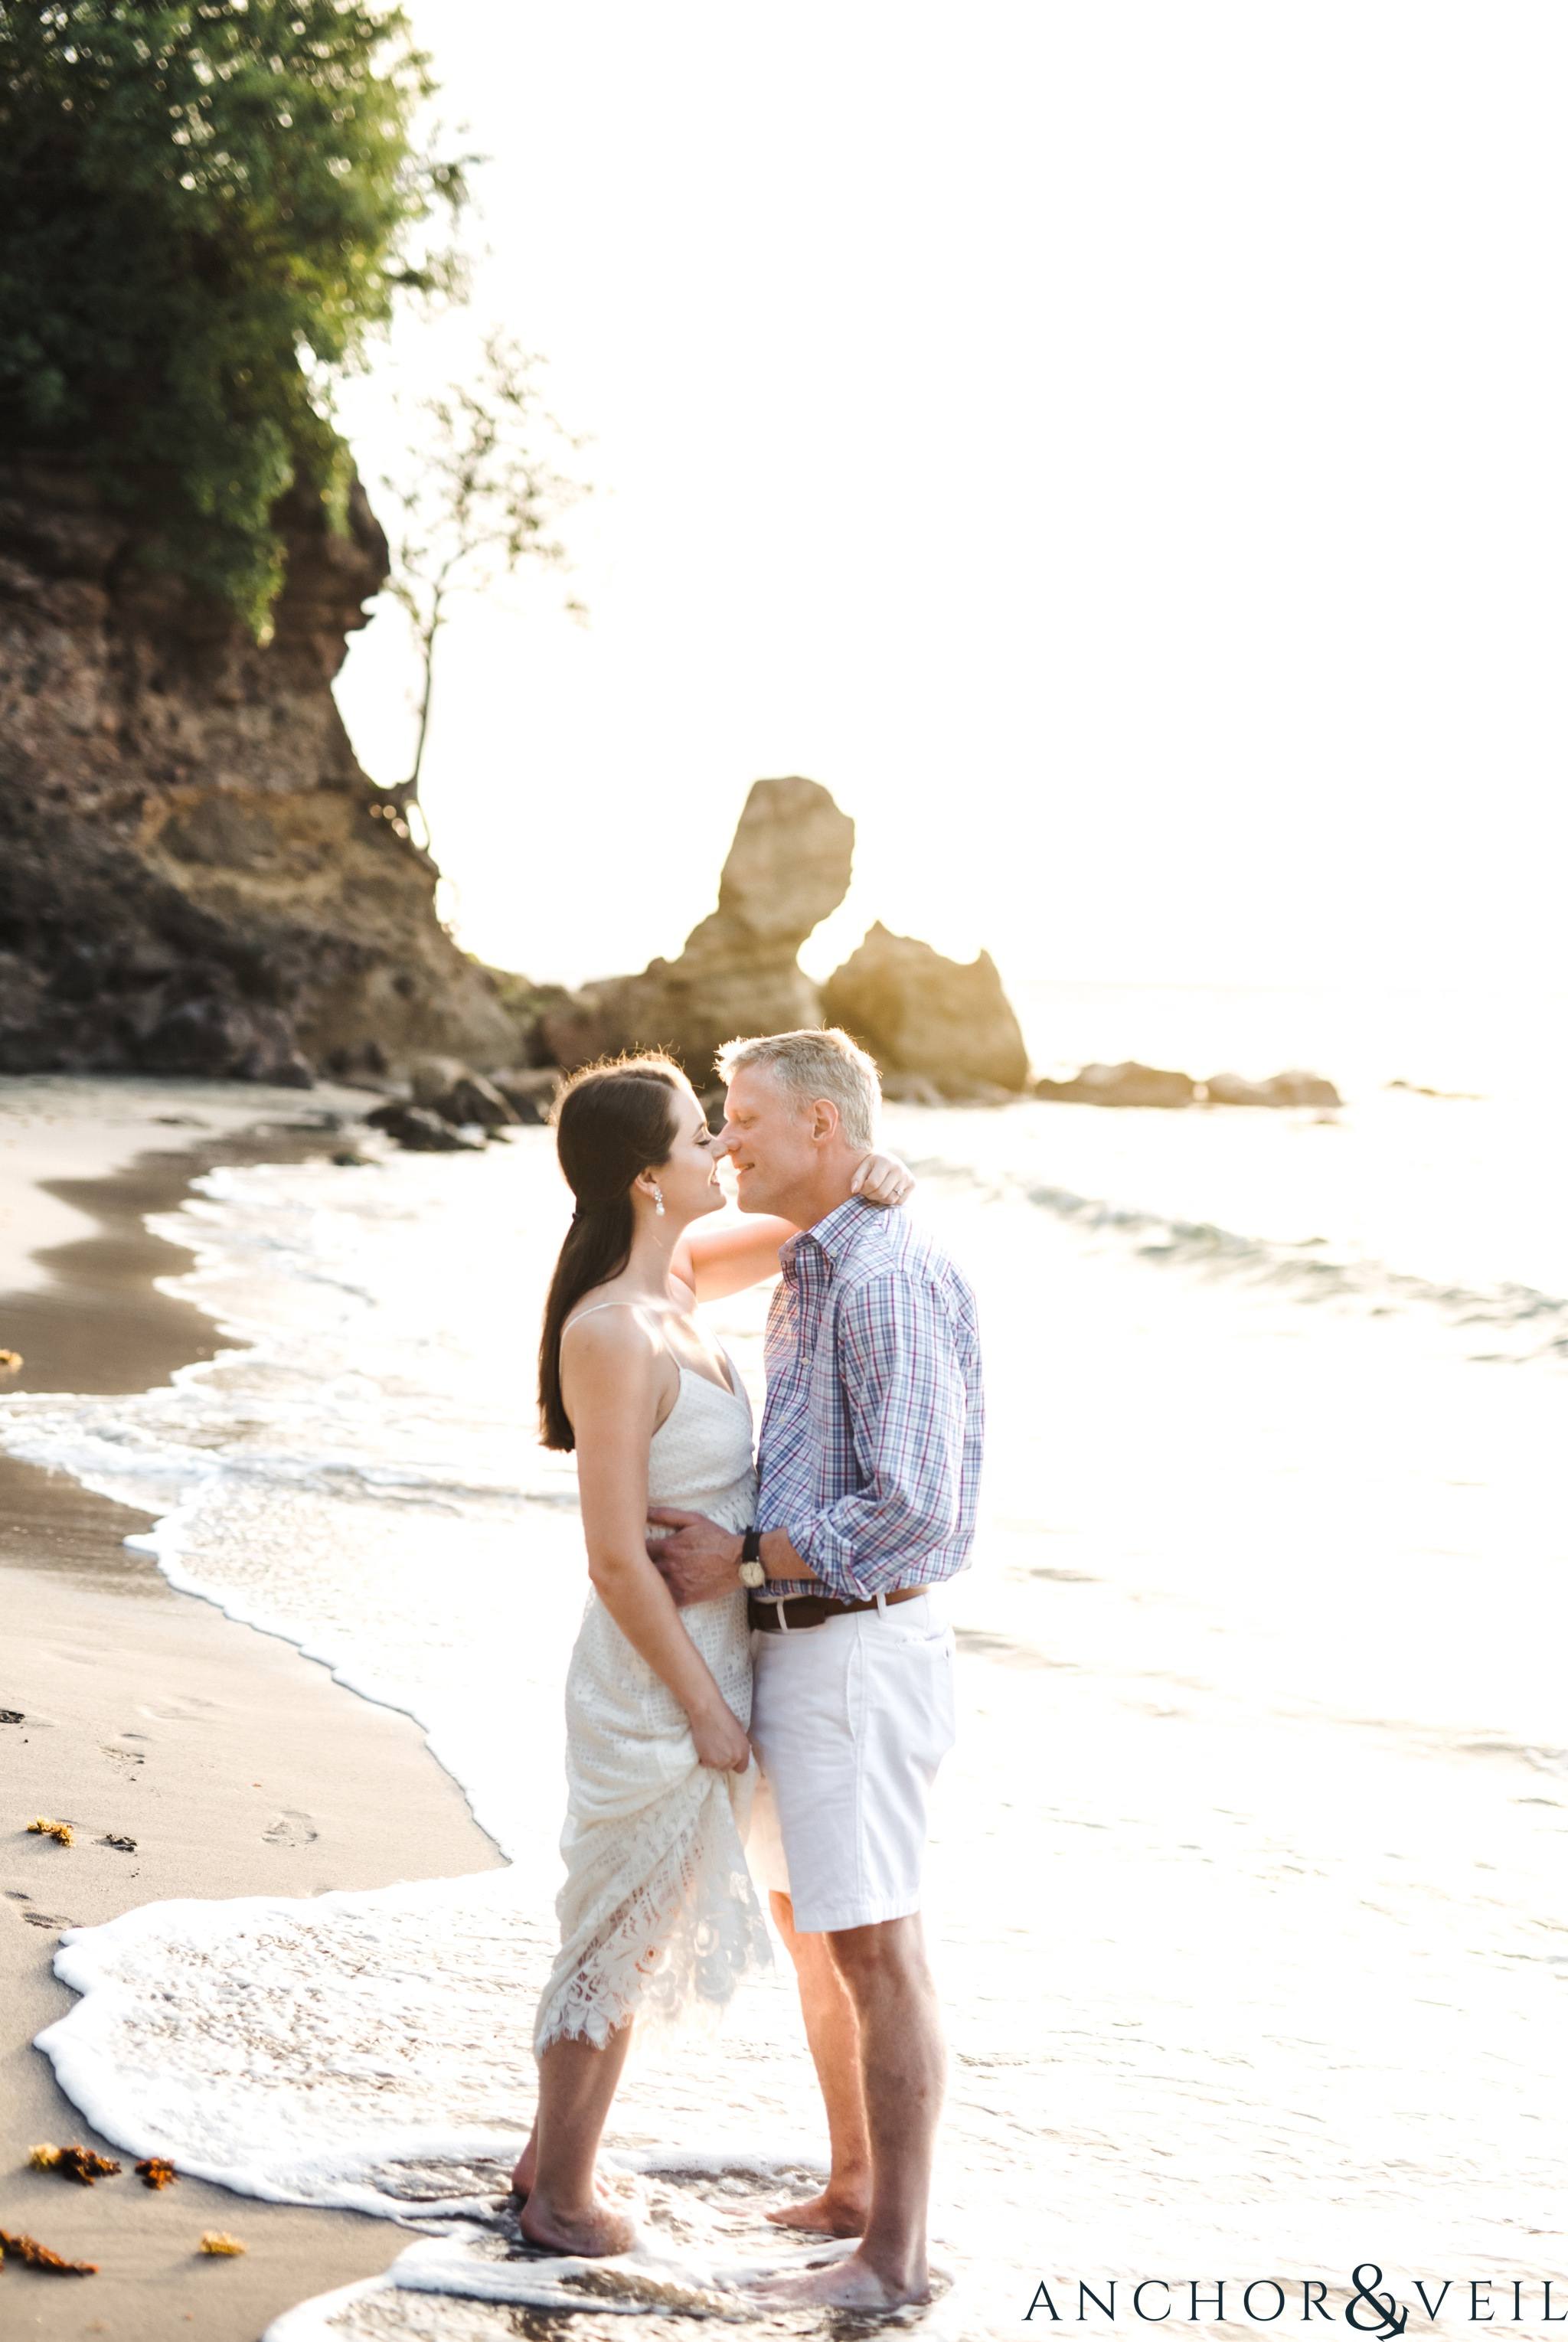 walking on the beach and kissing During their Cap Maison destination Wedding In St Lucia